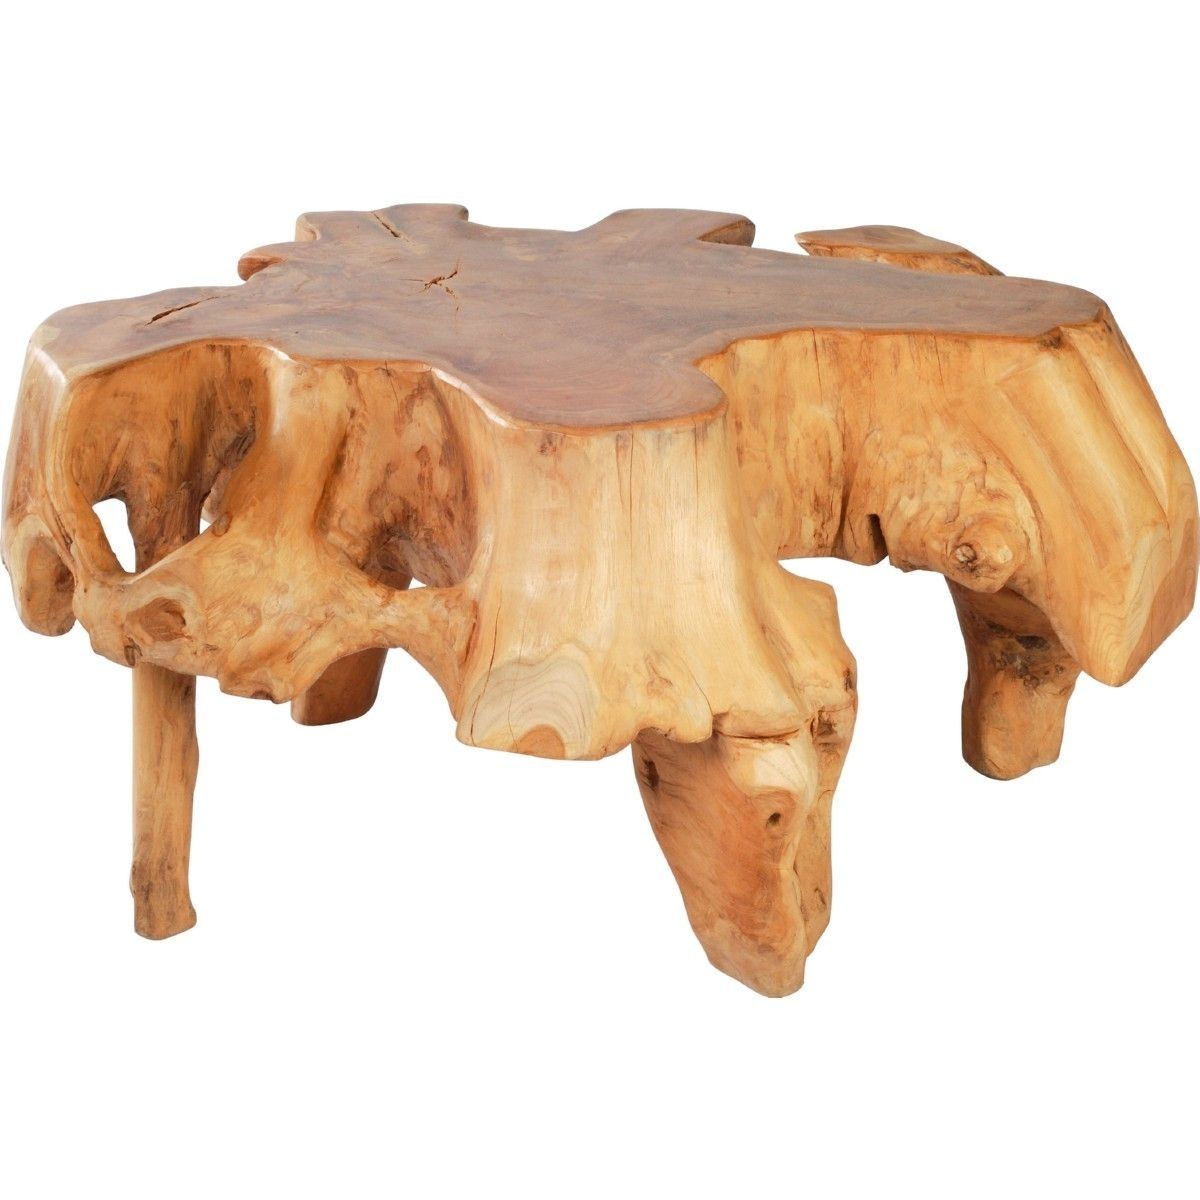 Zuo Modern Broll Coffee Table Organic Shape Teak Acrylic Gold Pertaining To Broll Coffee Tables (View 4 of 30)